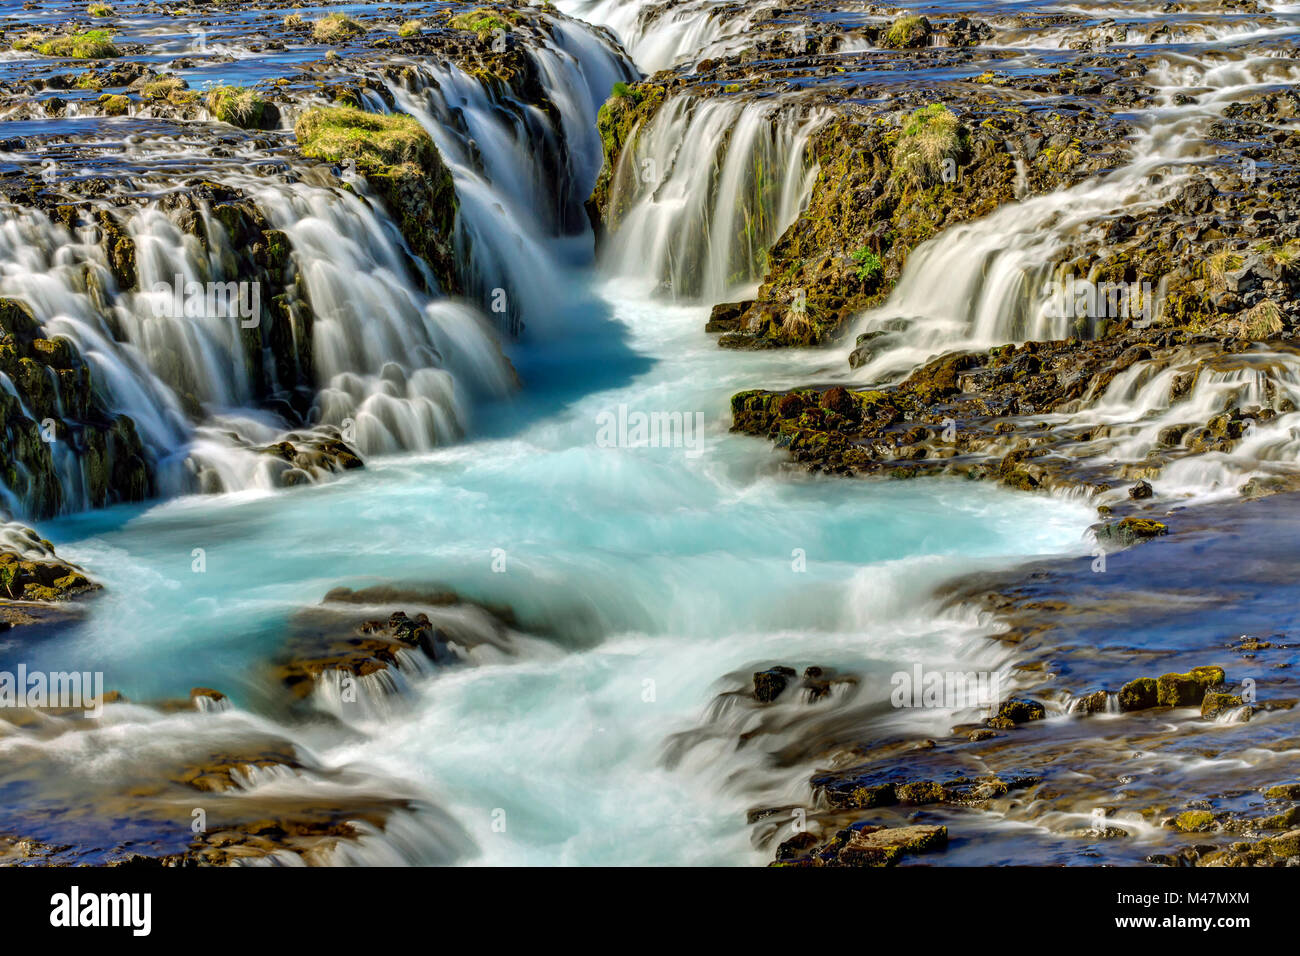 Detail of the lovely Bruarfoss waterfall in Iceland Stock Photo